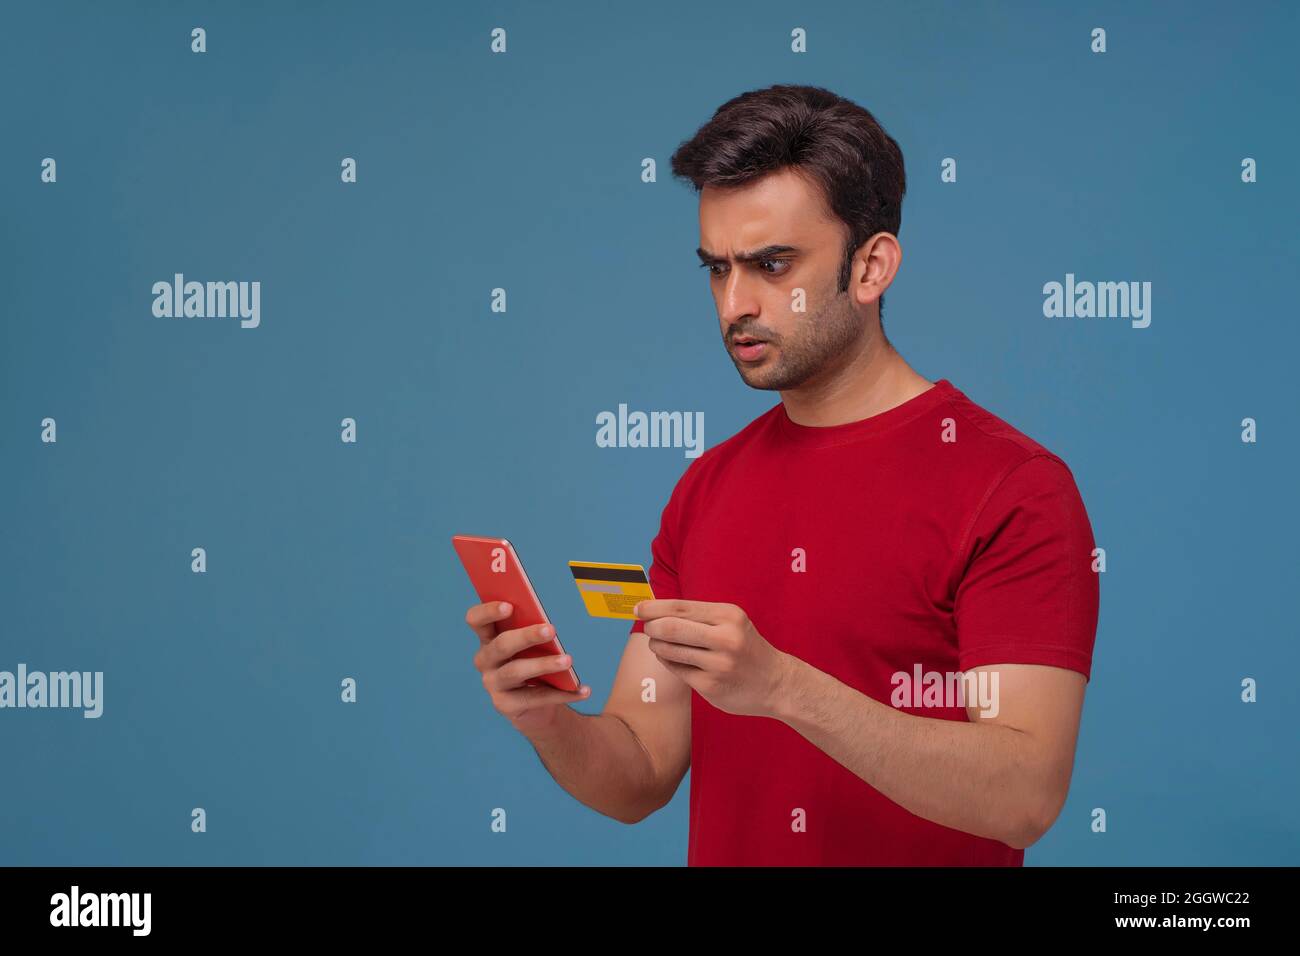 Portrait of a young man holding a credit card looking at his phone with a shocked expression. Stock Photo